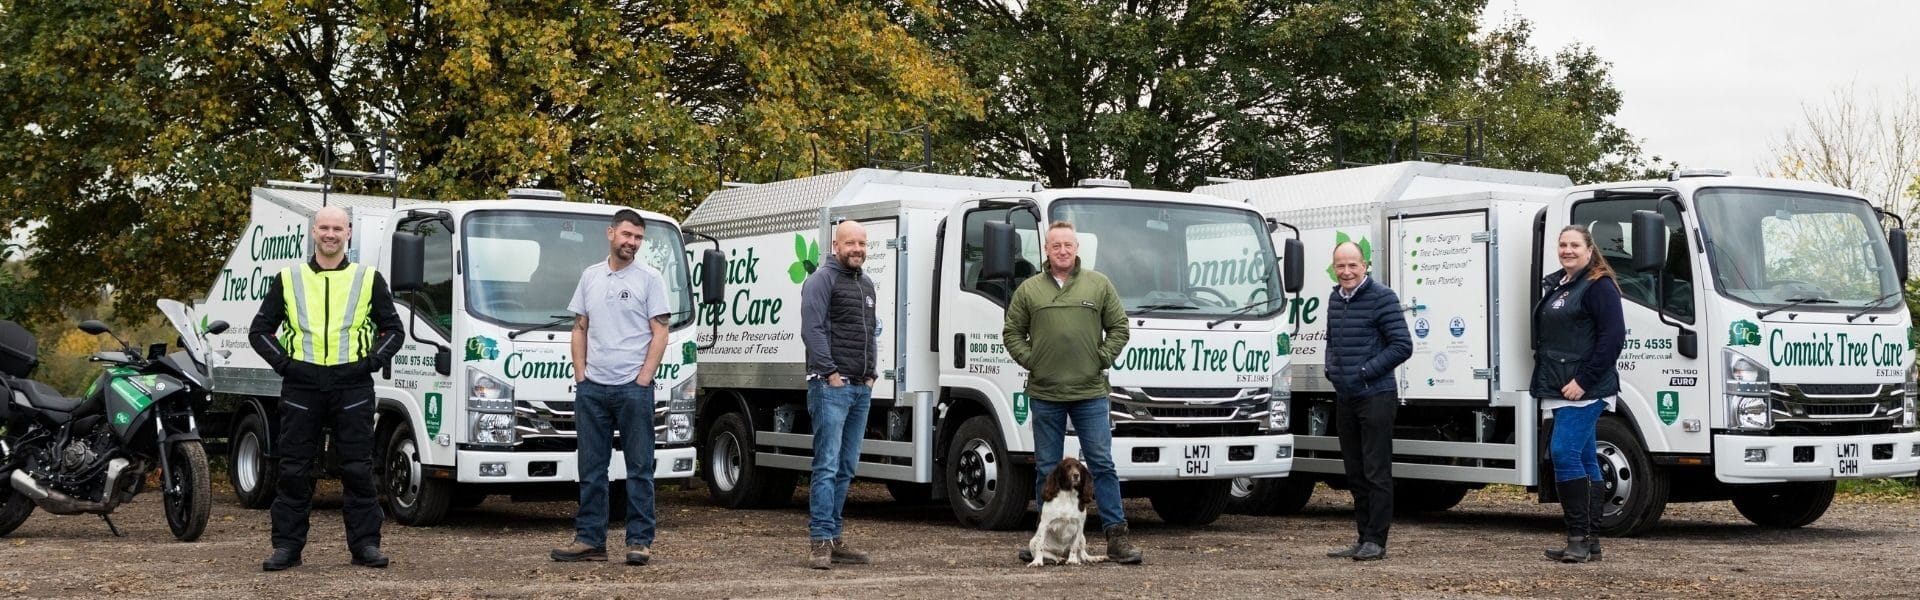 About Connick Tree Care. Senior Management Team